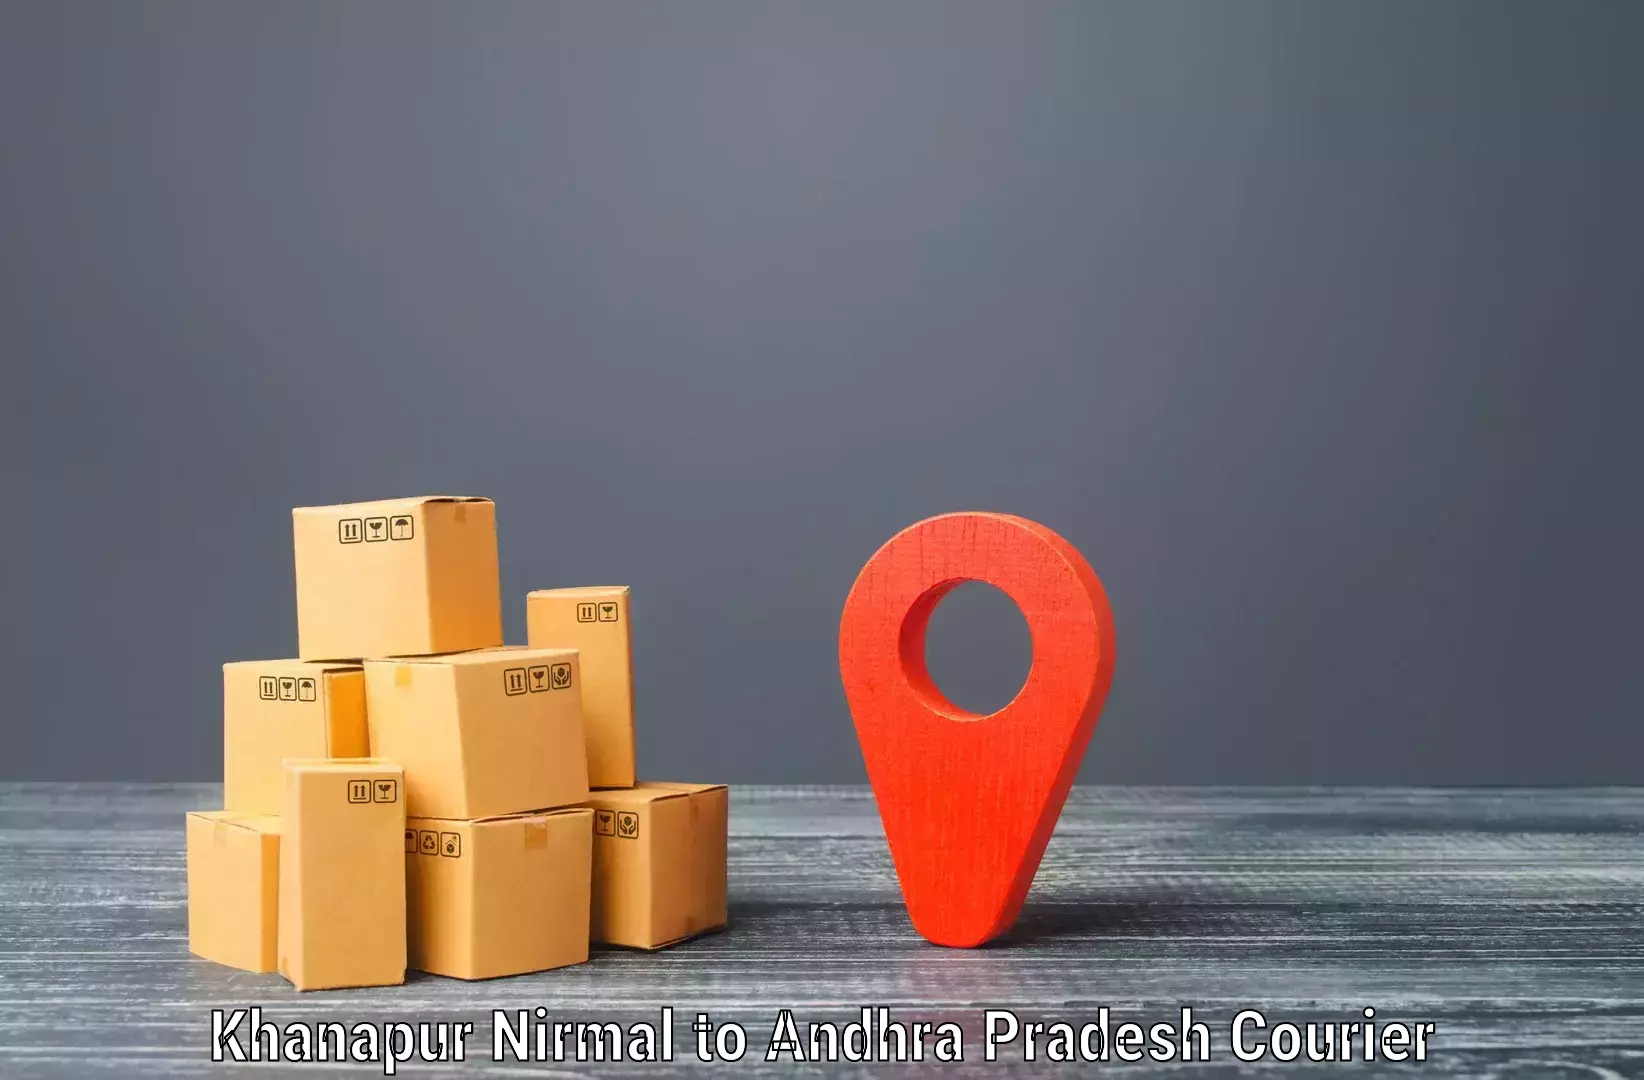 Nationwide shipping services Khanapur Nirmal to Ongole